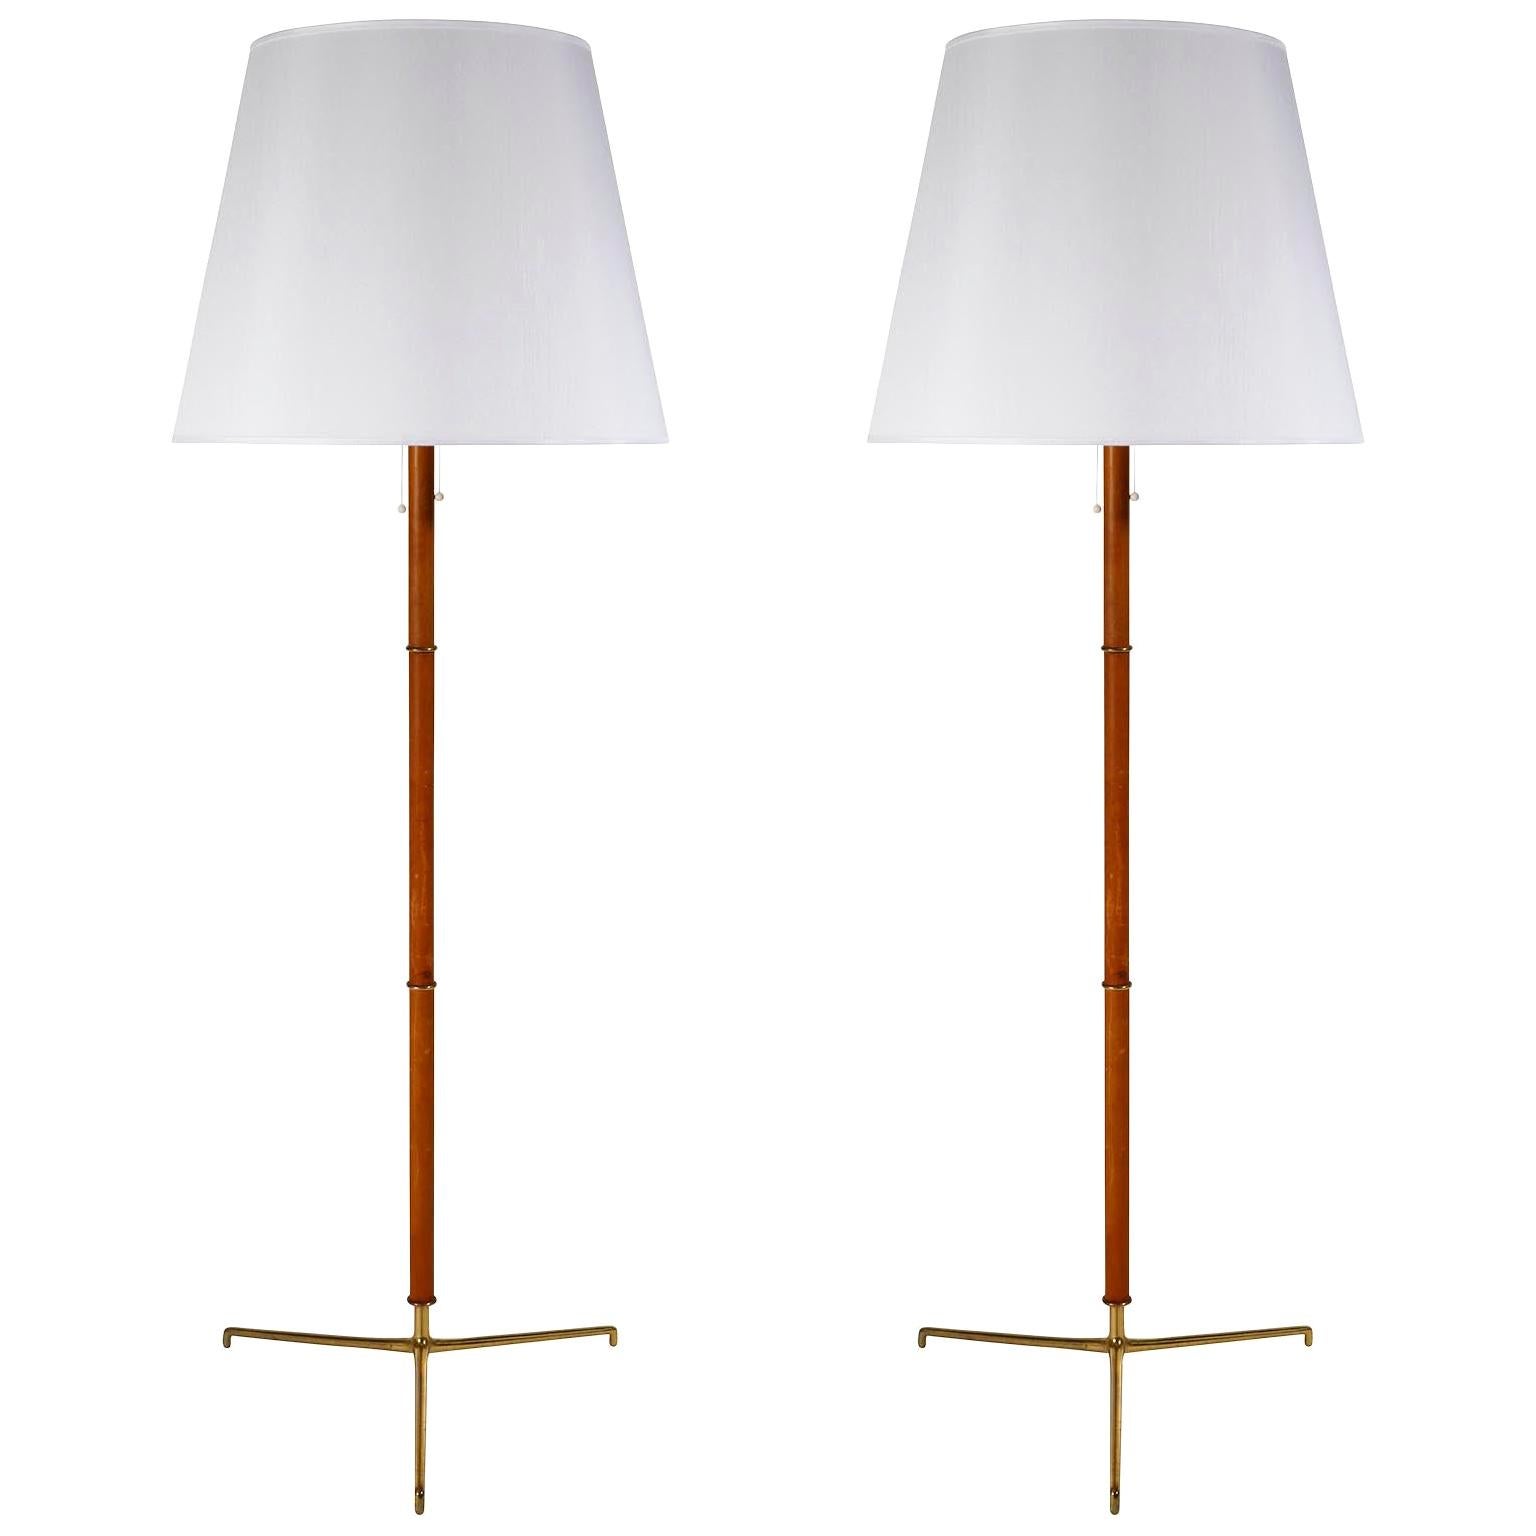 Pair Mid-Century Modern Floor Lamps Cognac Brown Leather Brass Tripod Base, 1960 For Sale